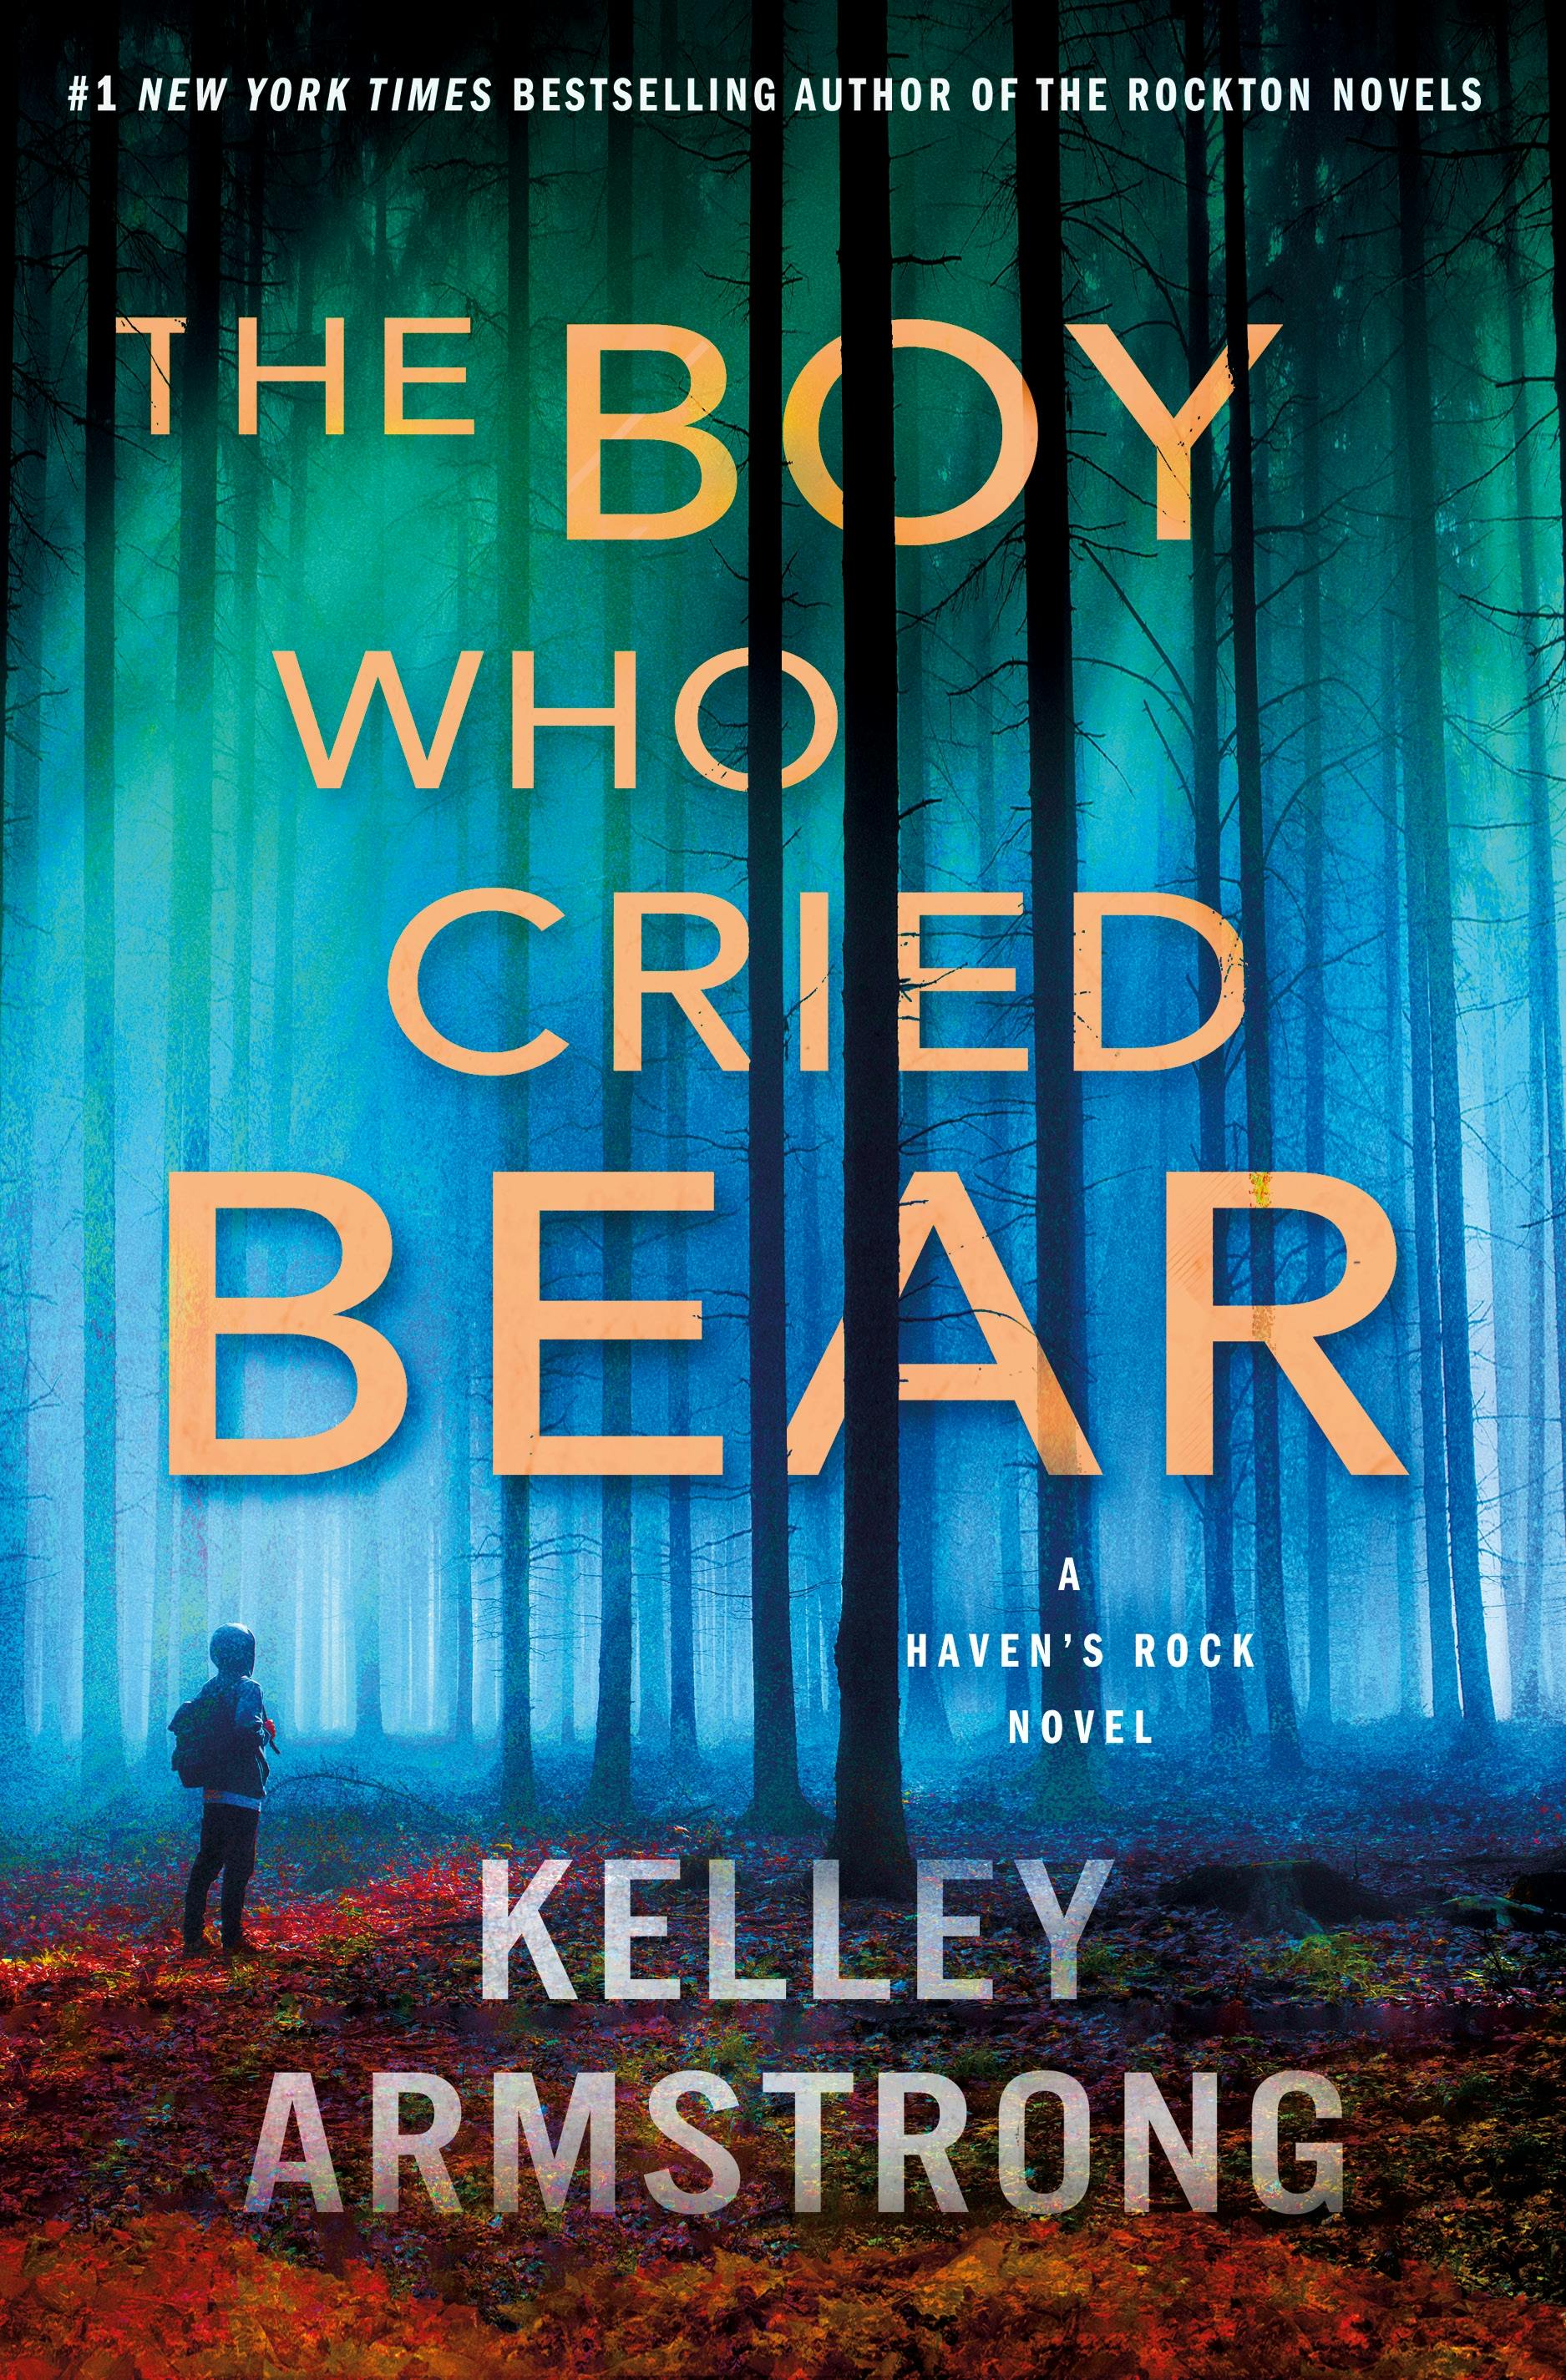 Image of The Boy Who Cried Bear